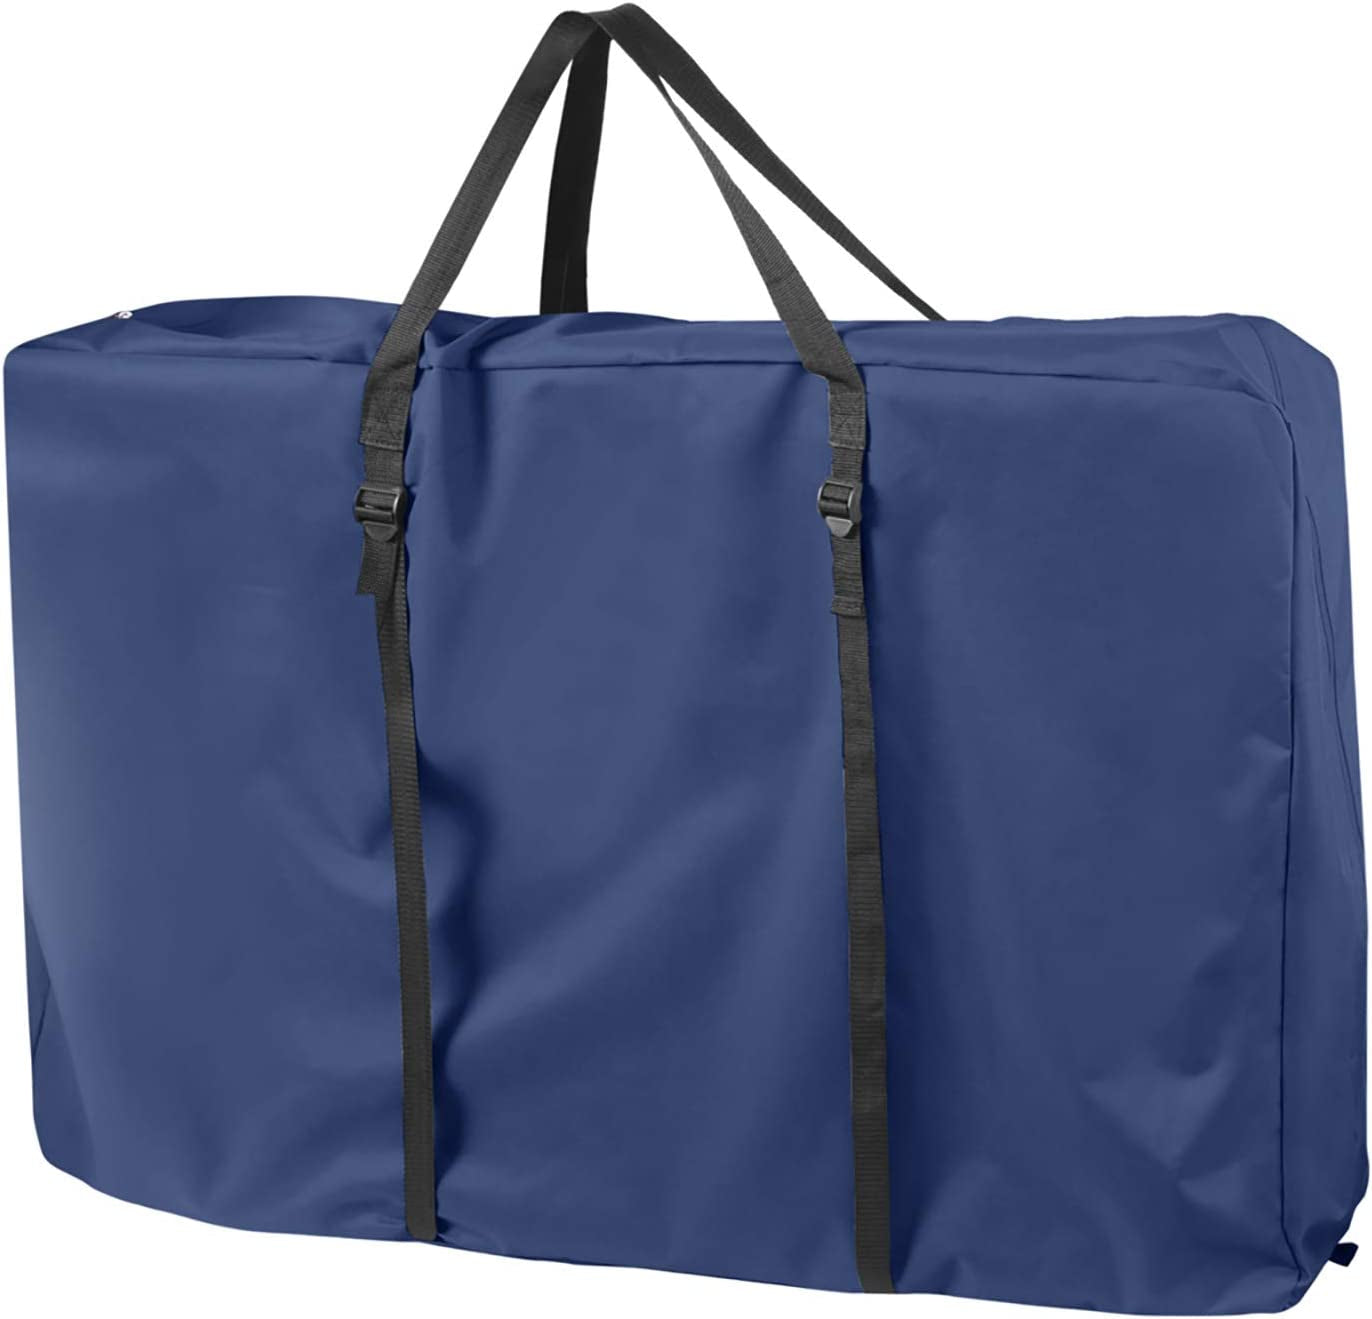 Explore Land, Explore Land Heavy Duty Chair Storage Bag for Folding Longue Chair, Zero Gravity Chair, Light Weight Transport Chair (42 Lx 9 Wx 28 H Inches, Blue)